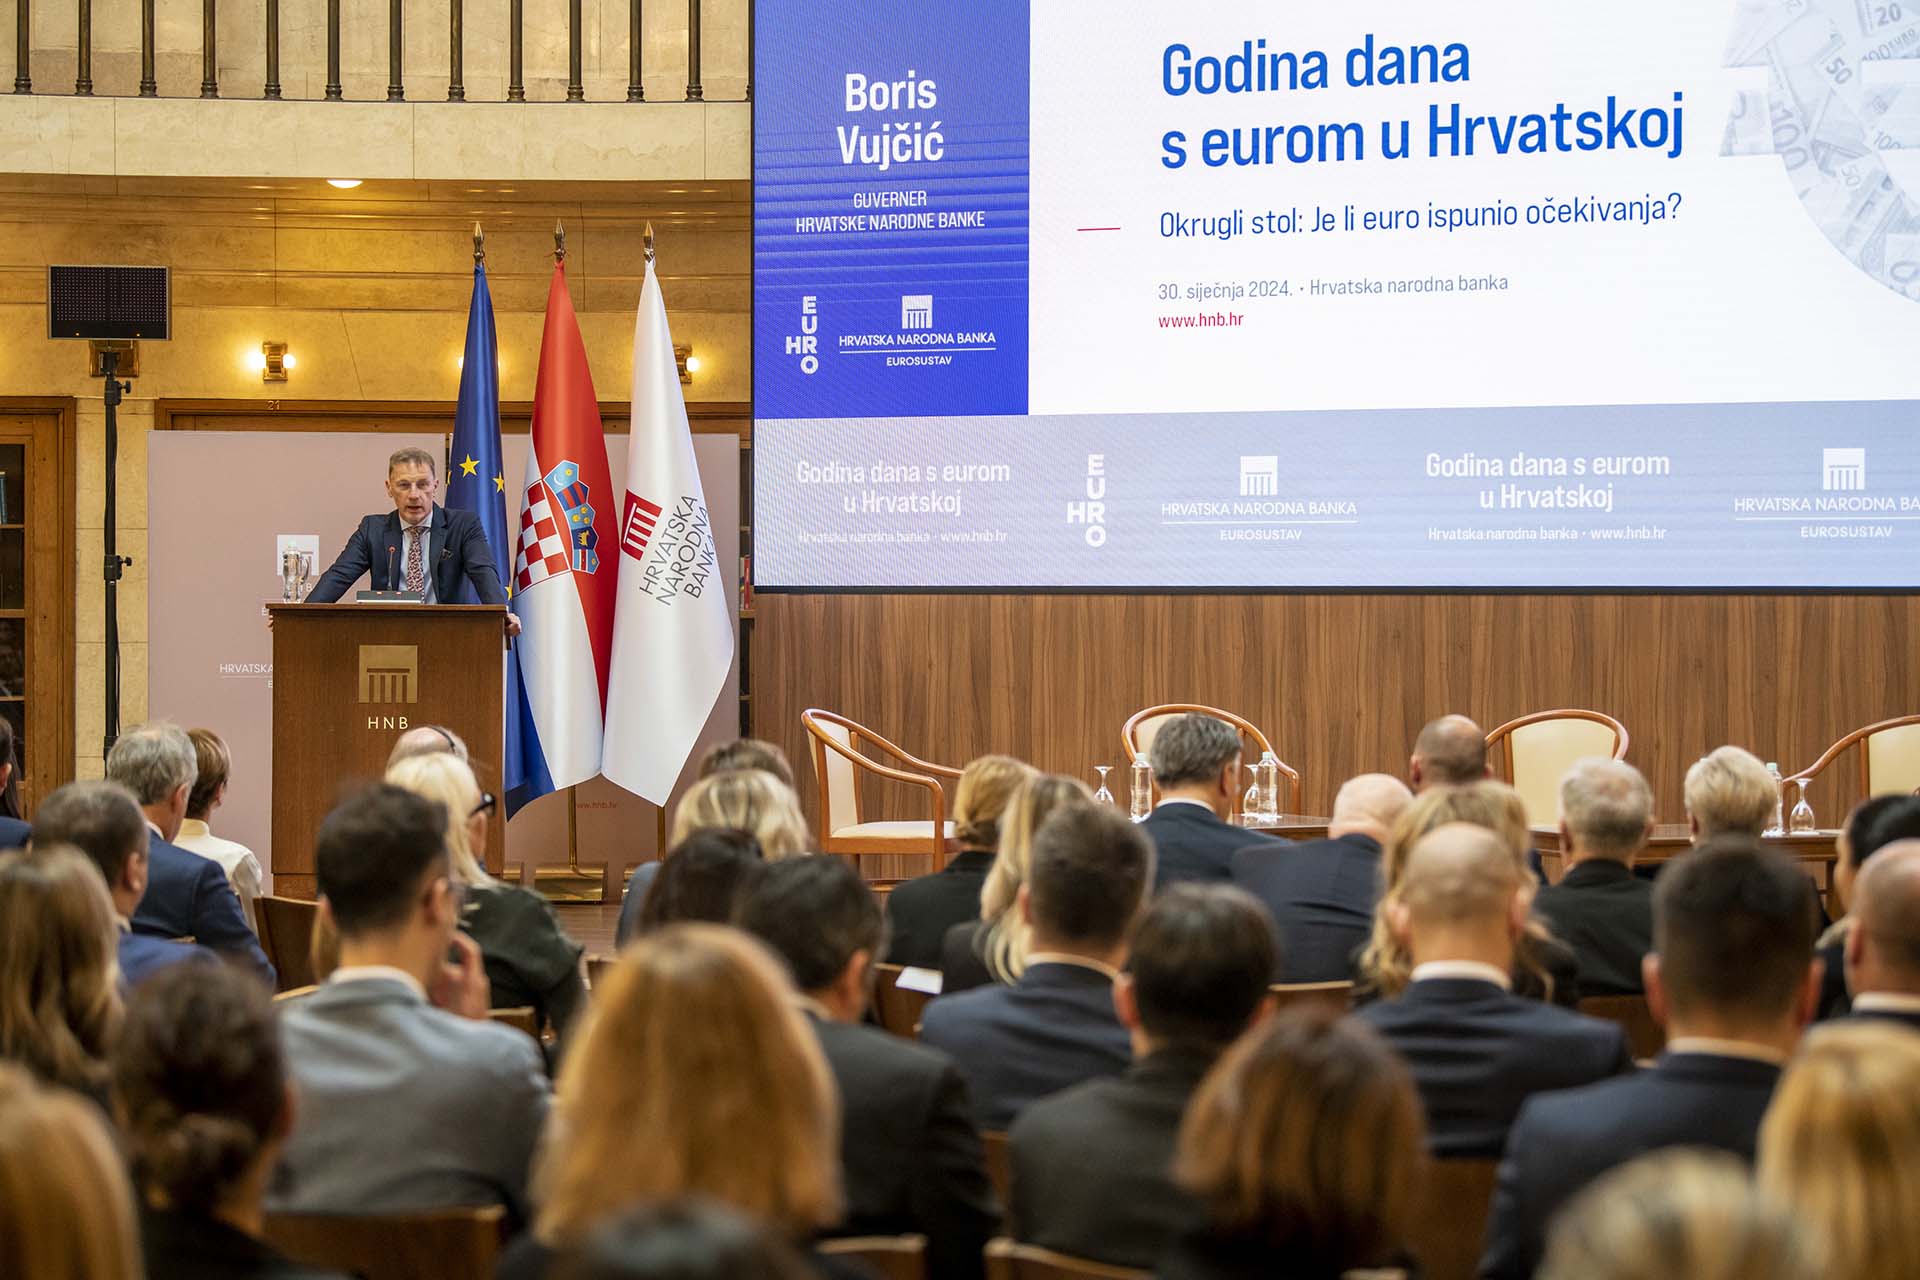 CNB hosted a conference on the first anniversary of the introduction of the euro in Croatia